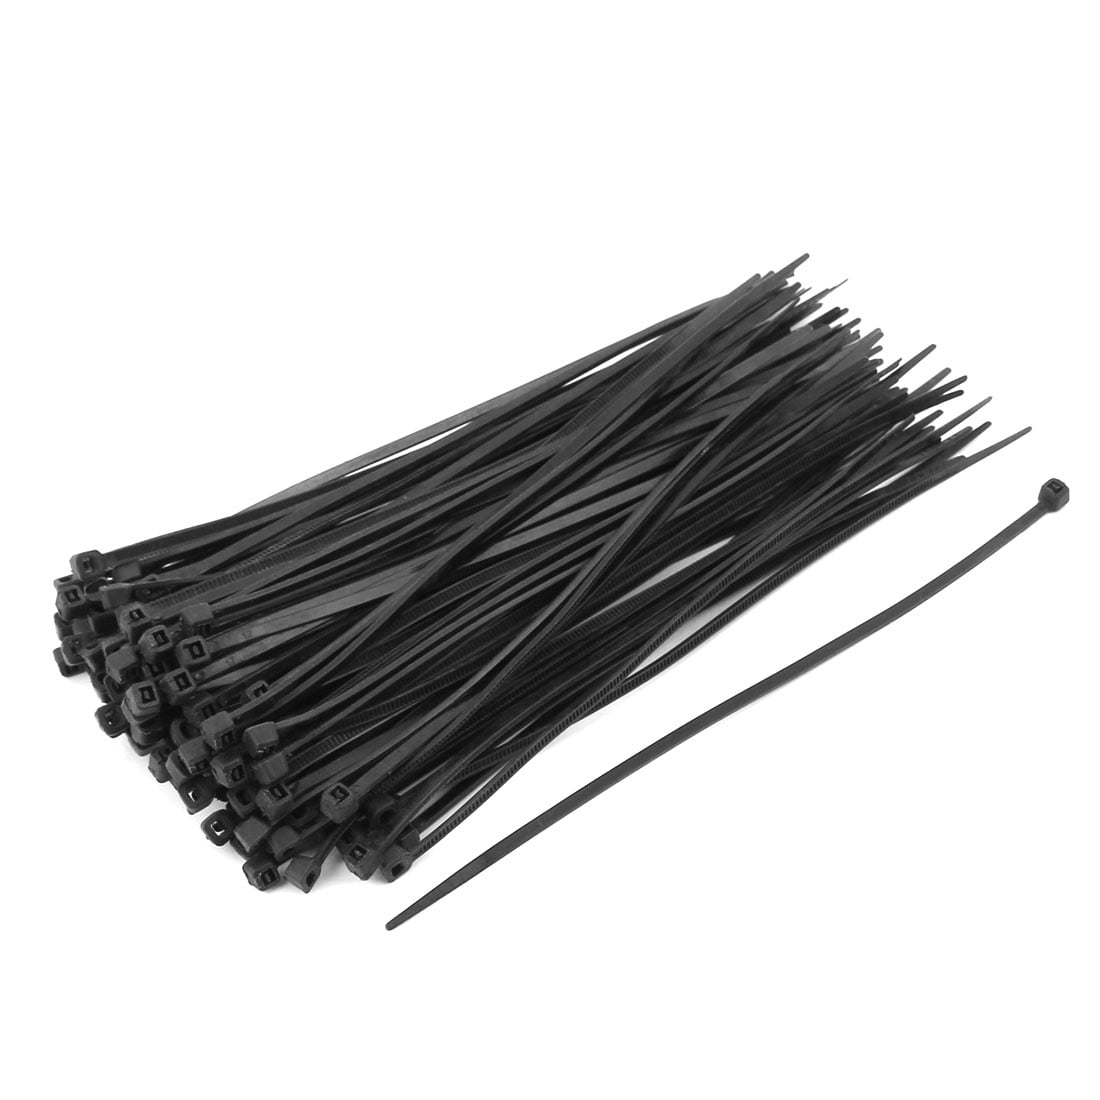 Black 100 PCS 11" inch ZIP Ties Nylon 50 lbs Rated Strap Cable Wire Tires 